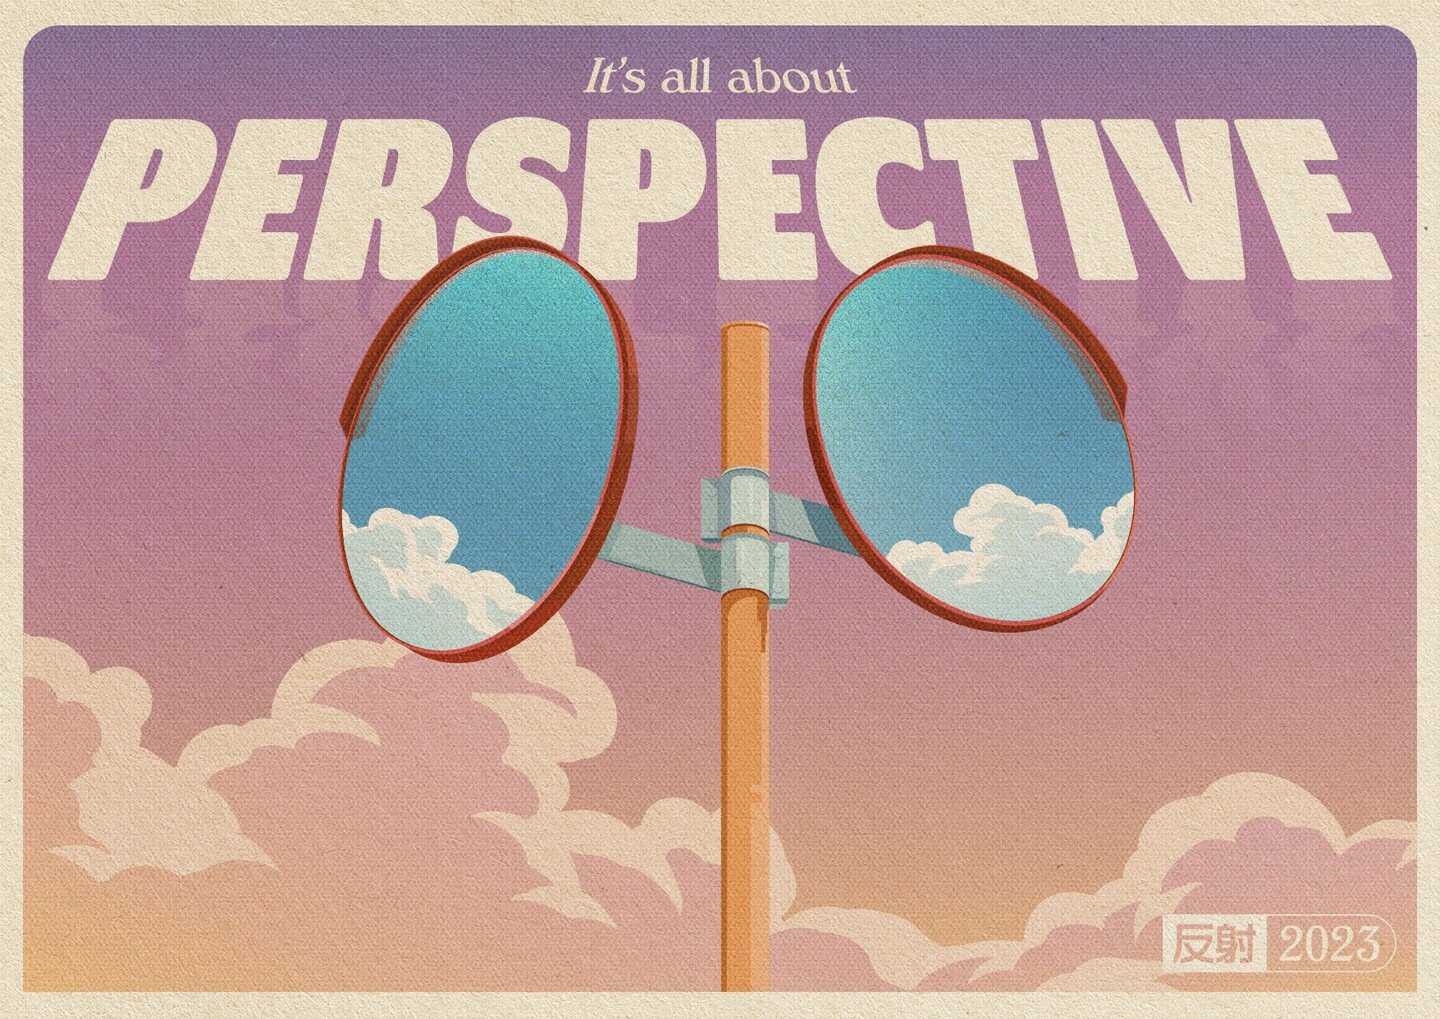 It's all about perspective.

I made this as it's something I often need to remind myself - I'm a massive pessimist by nature, and that's an exhausting place to be. 

Software: Illustrator &amp; Photoshop. 
Time: 3 hours.